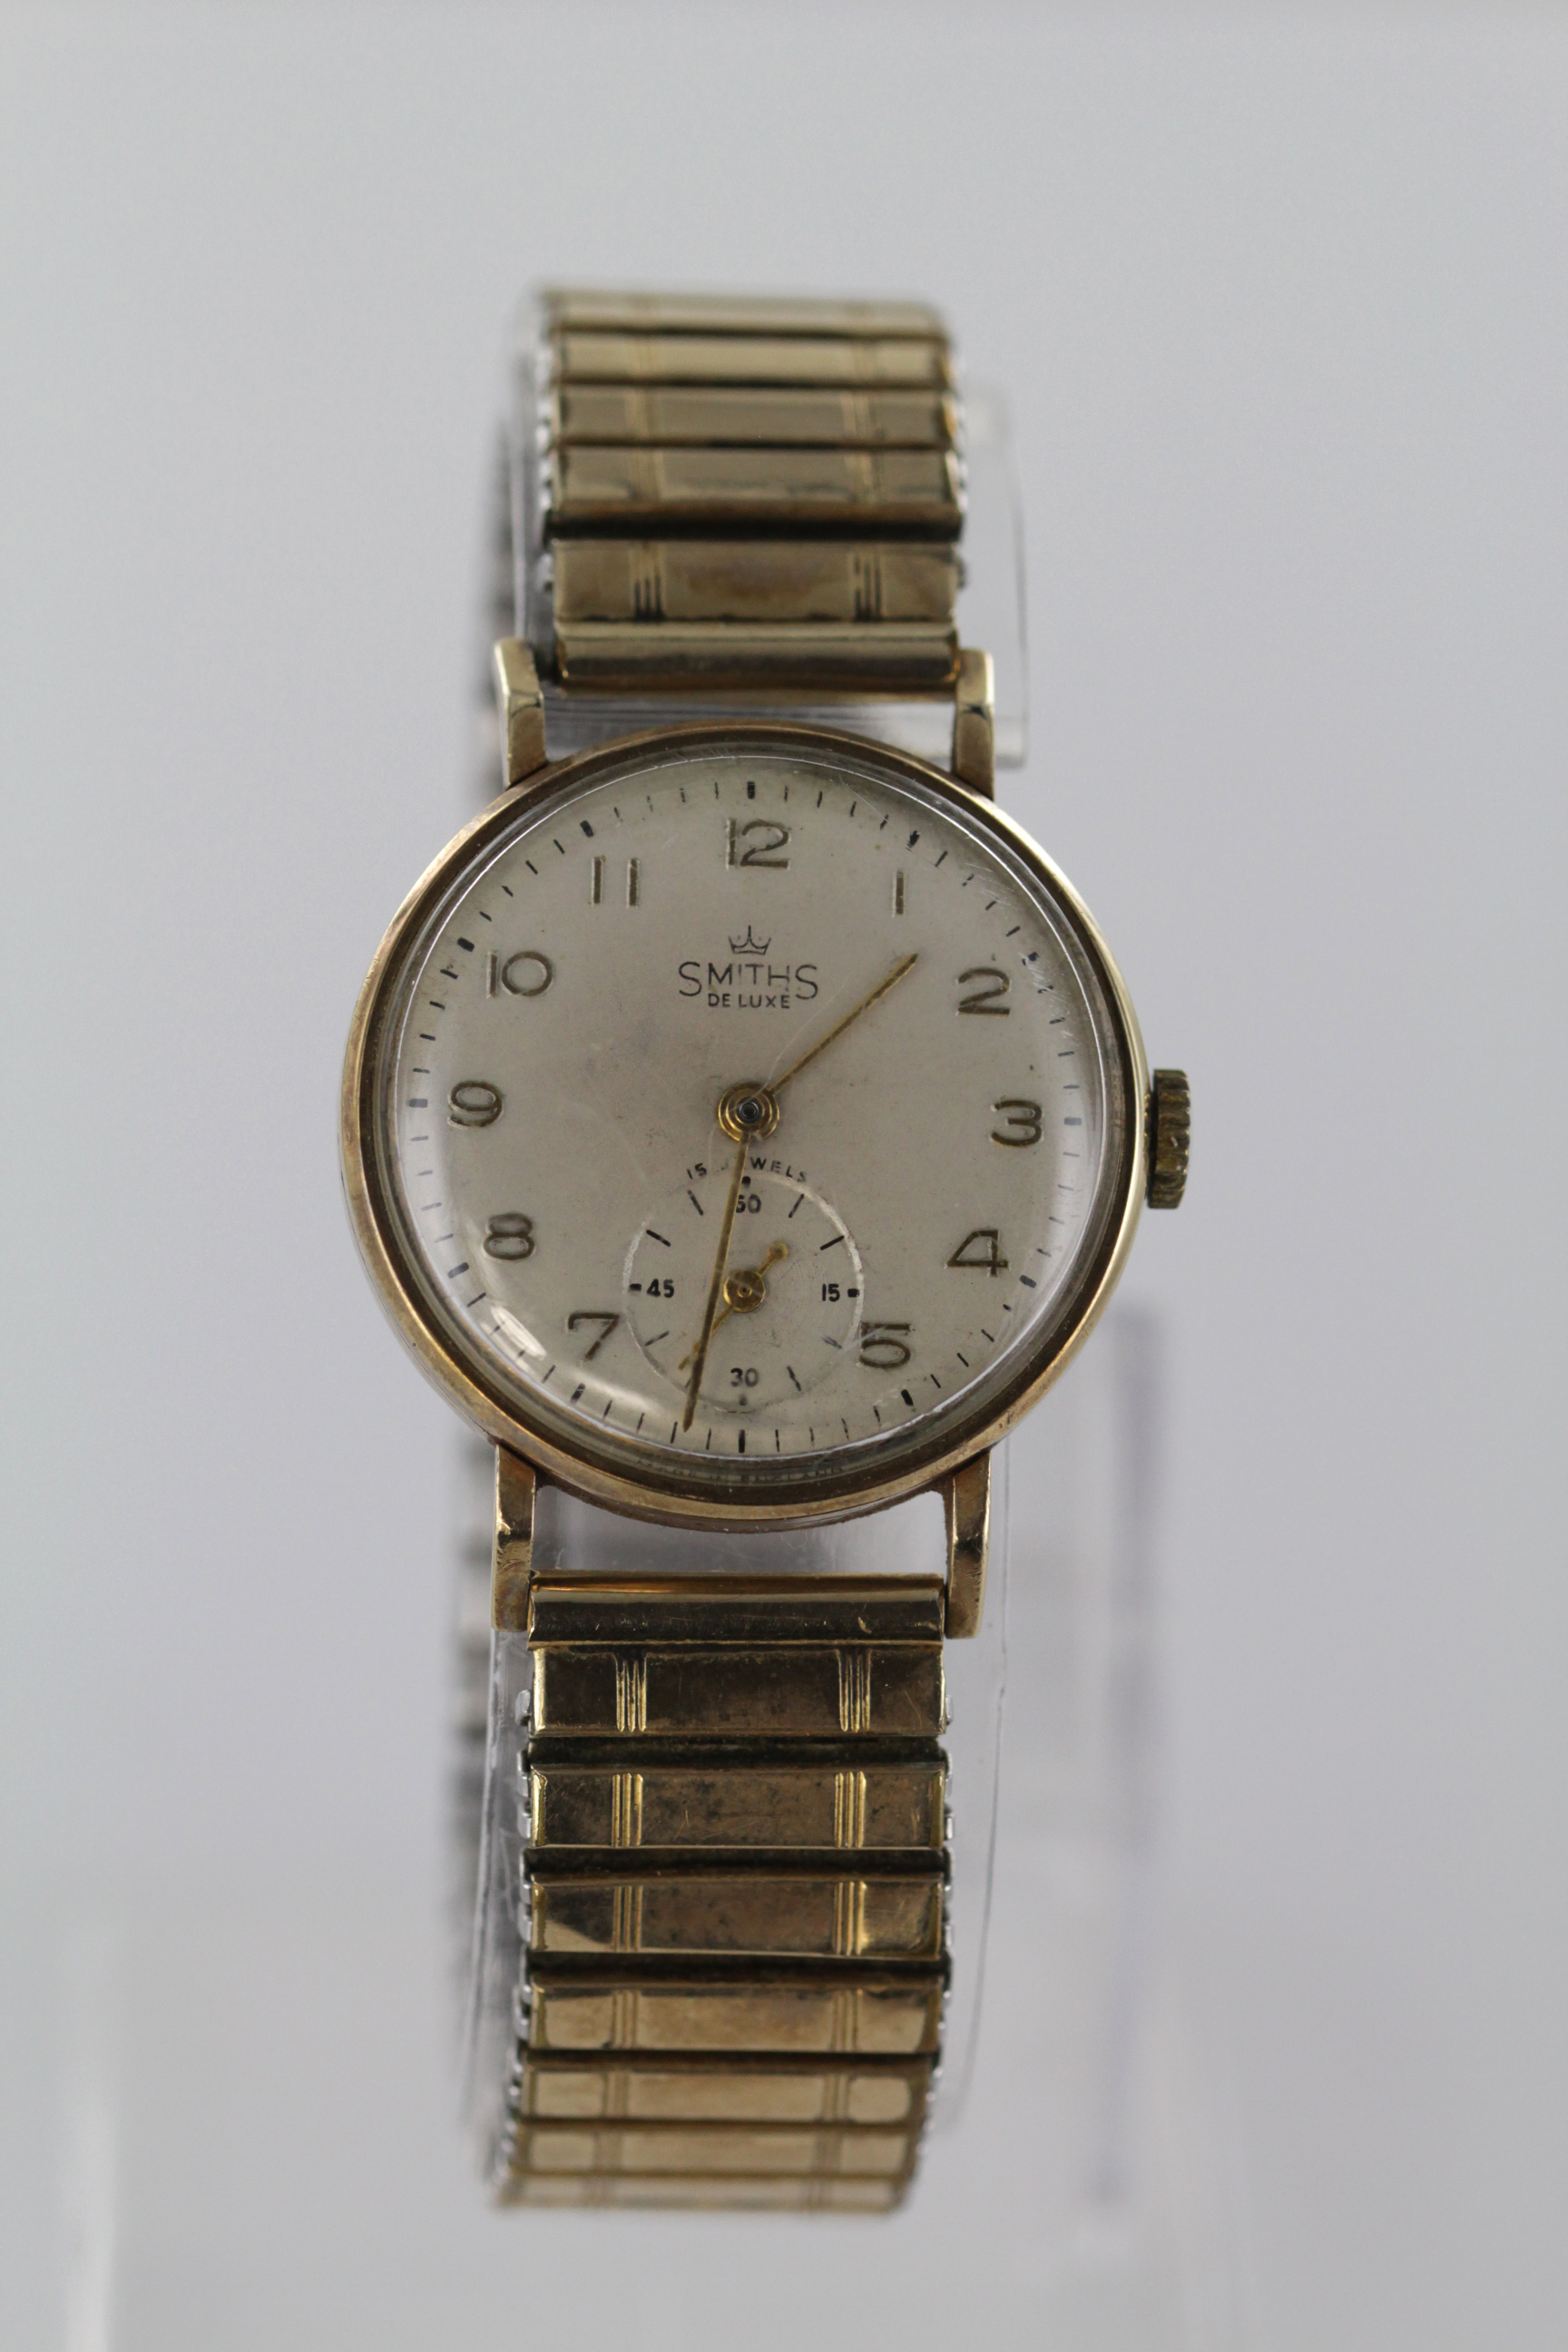 Gents 9ct gold cased "Smiths Deluxe" wristwatch. The cream dial with arabic numerals and